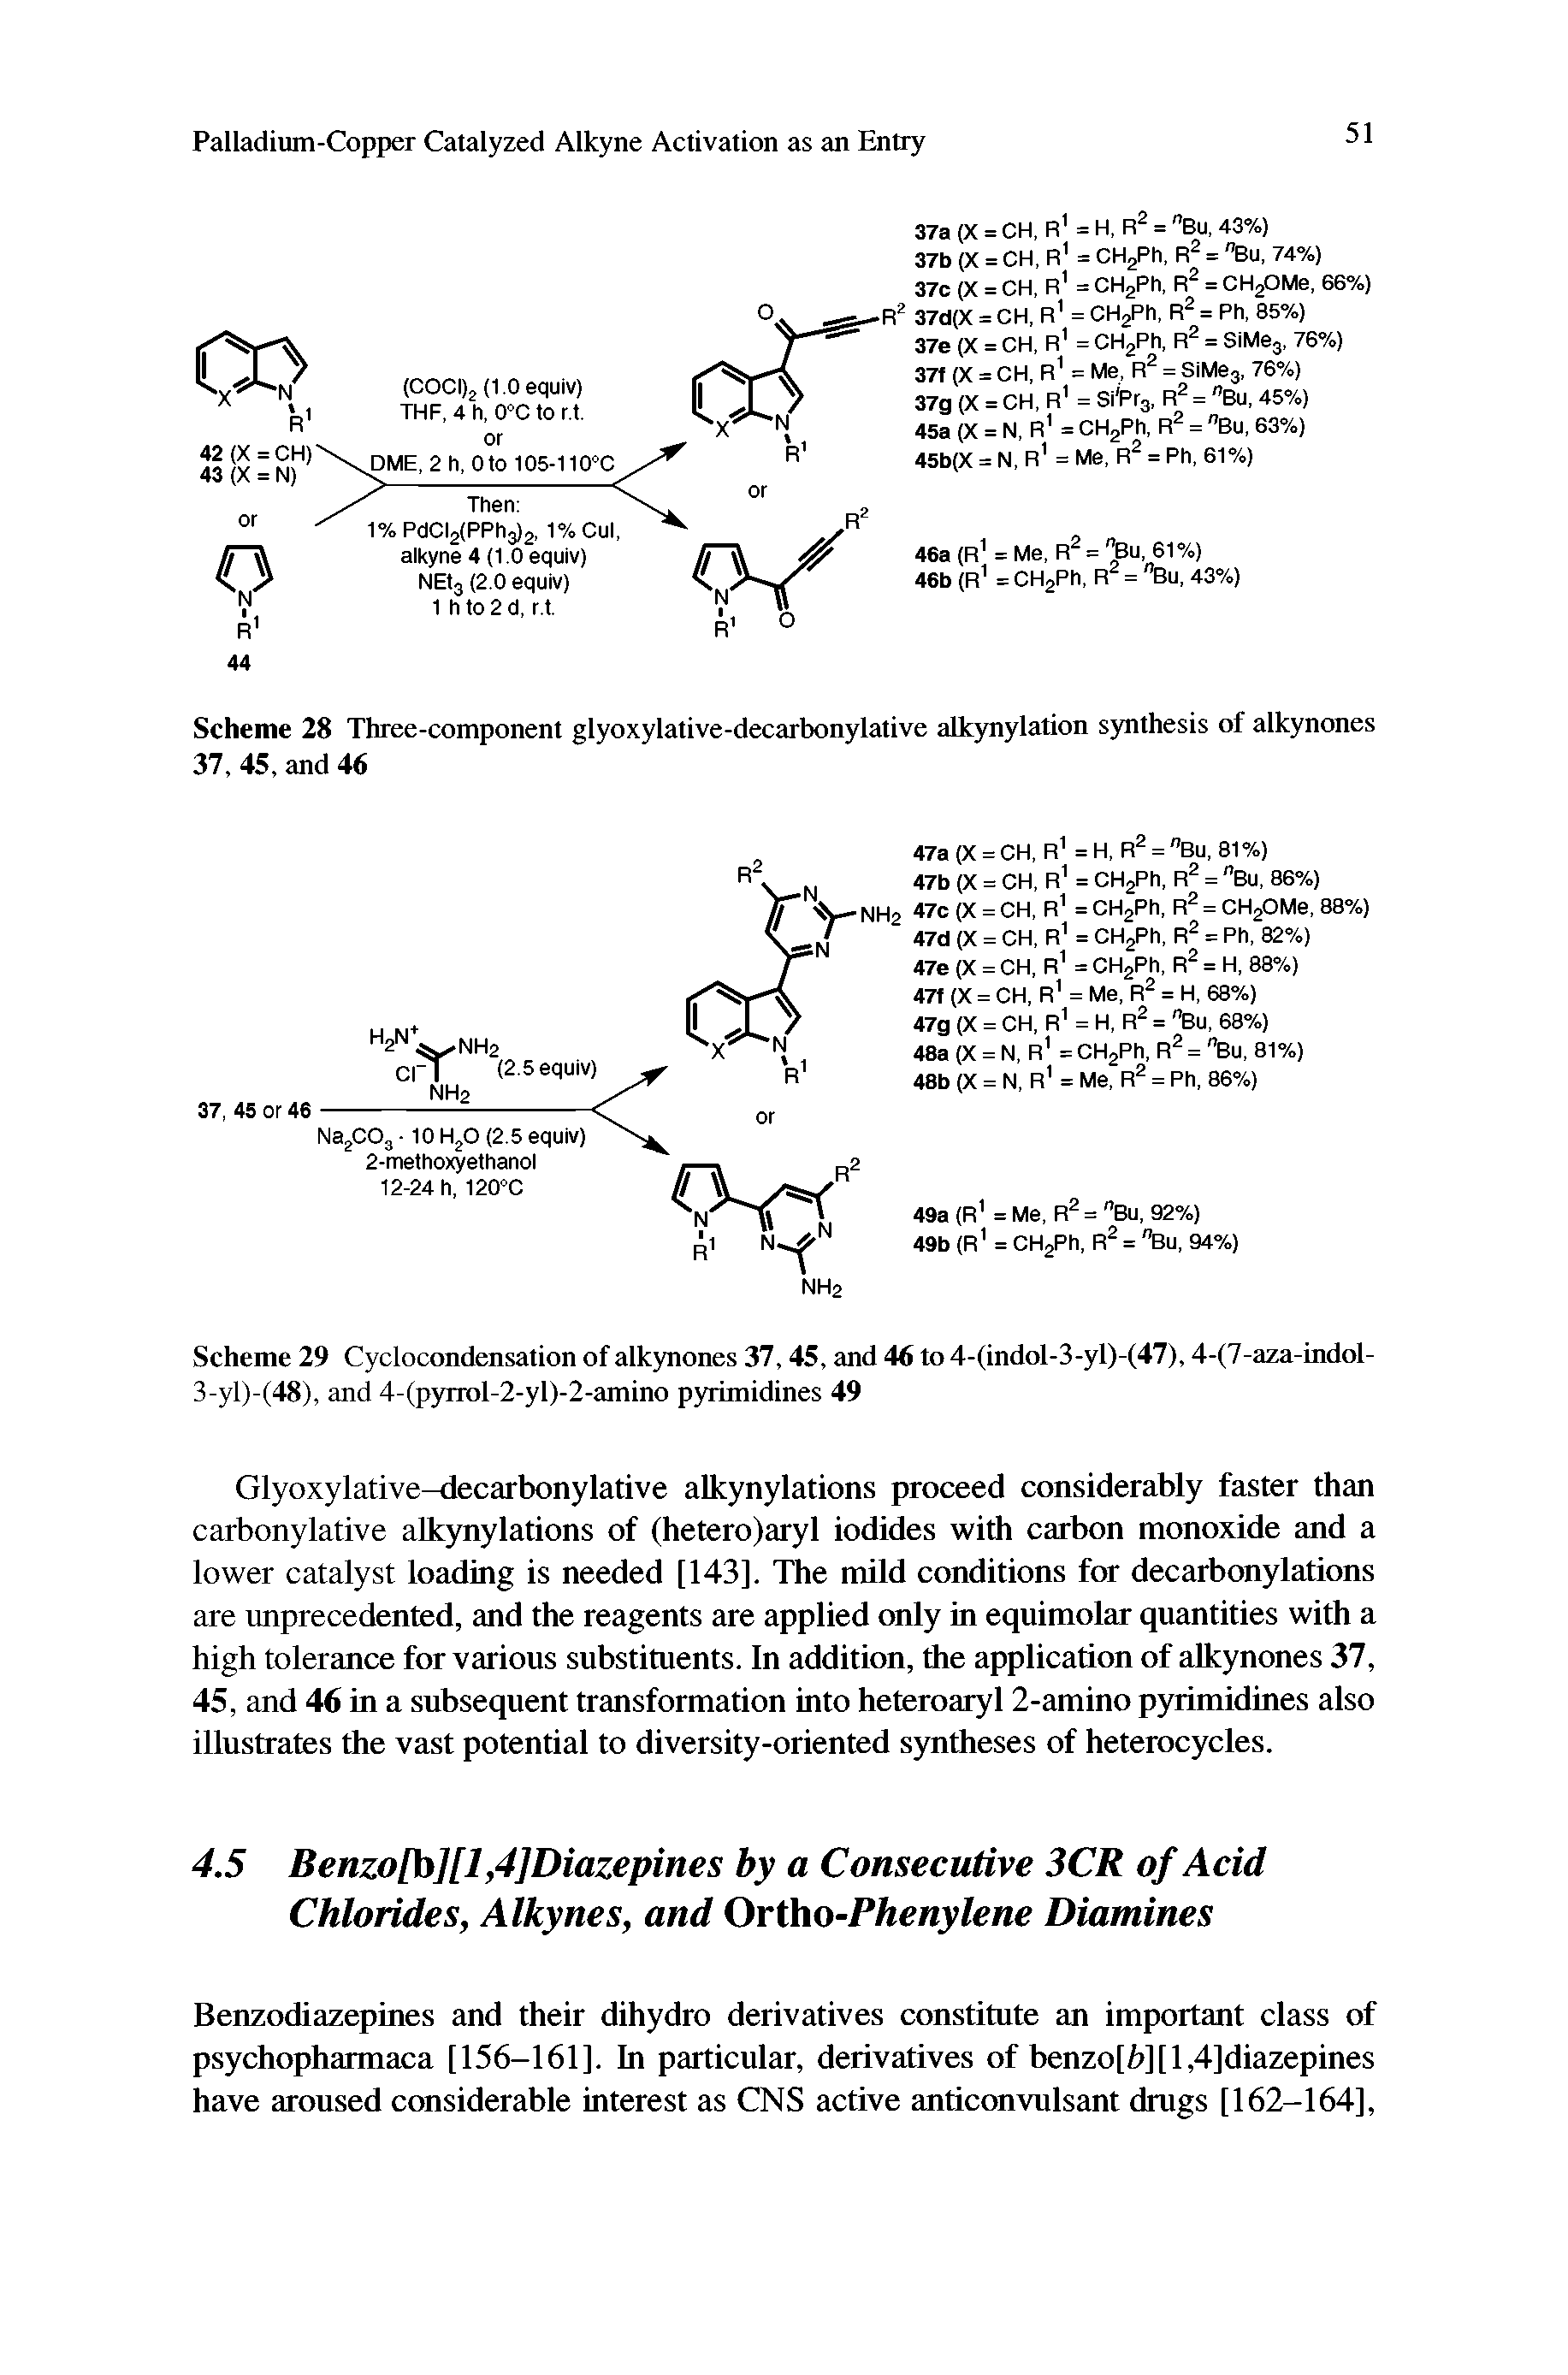 Scheme 28 Three-component glyoxylative-decarbonylative alkynylation synthesis of alkynones 37, 45, and 46...